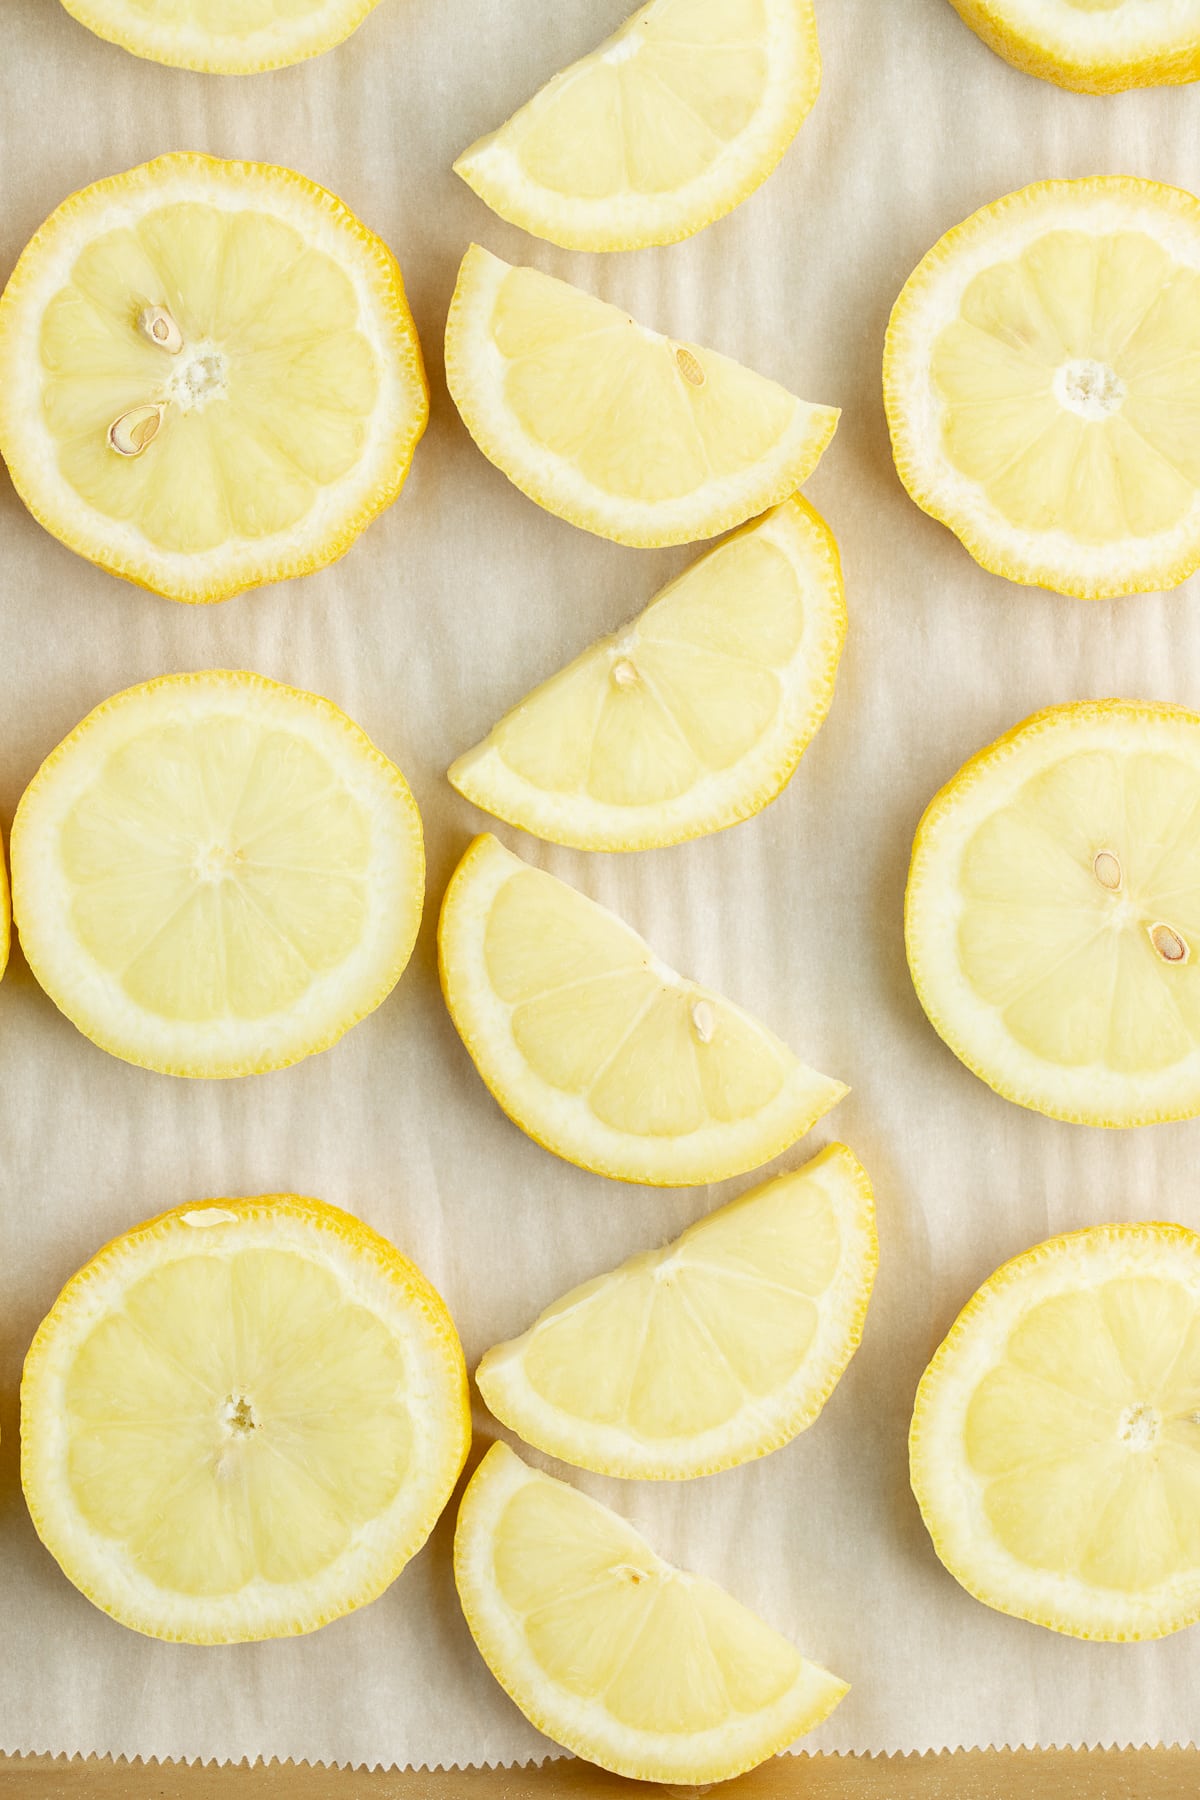 slices of citrus on a baking sheet.